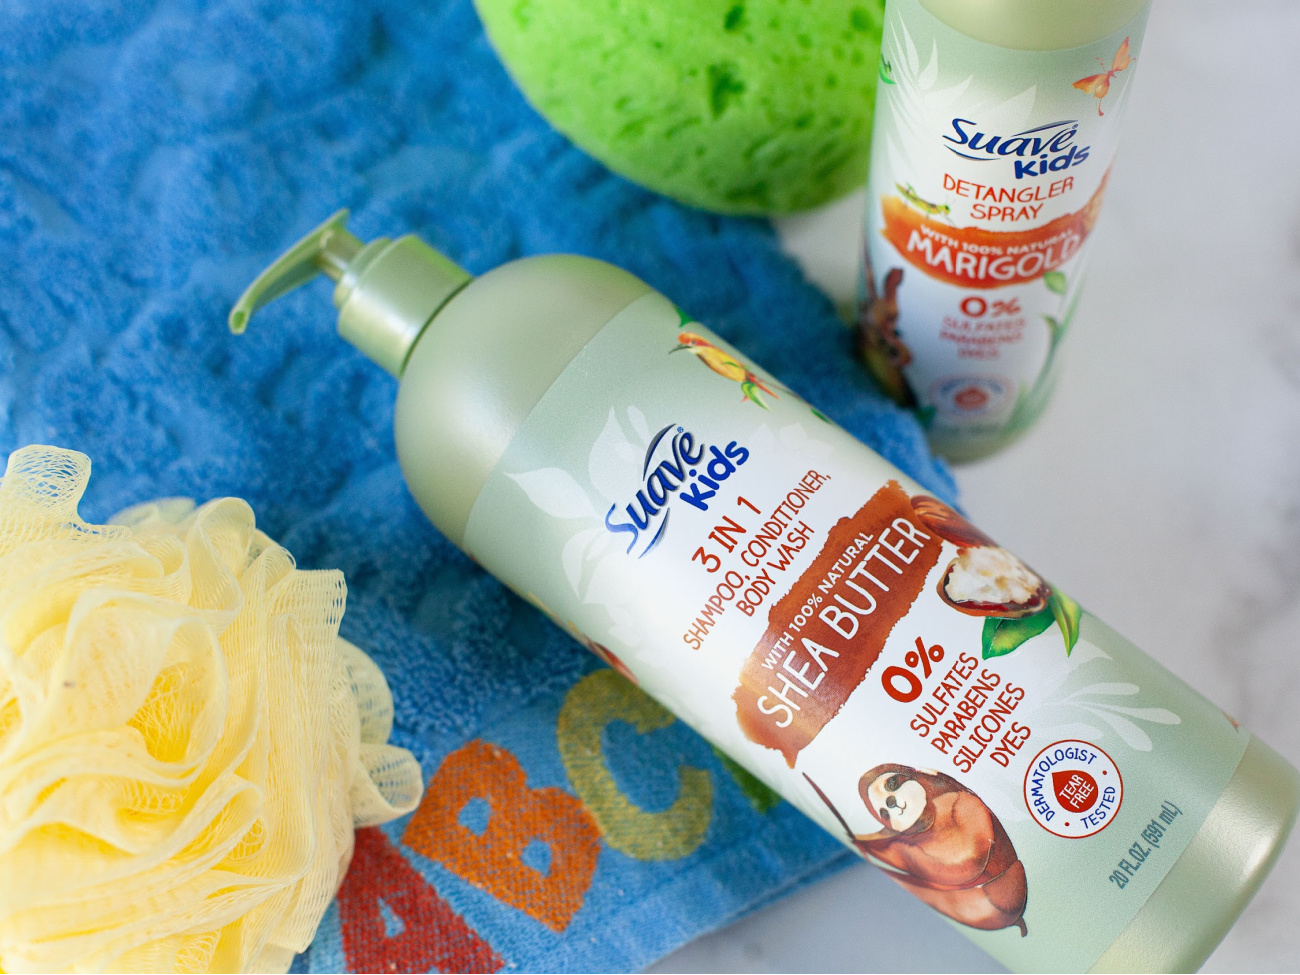 Suave Kids Naturals Just $2.79 At Publix (Regular Price $4.29) - TODAY ONLY on I Heart Publix